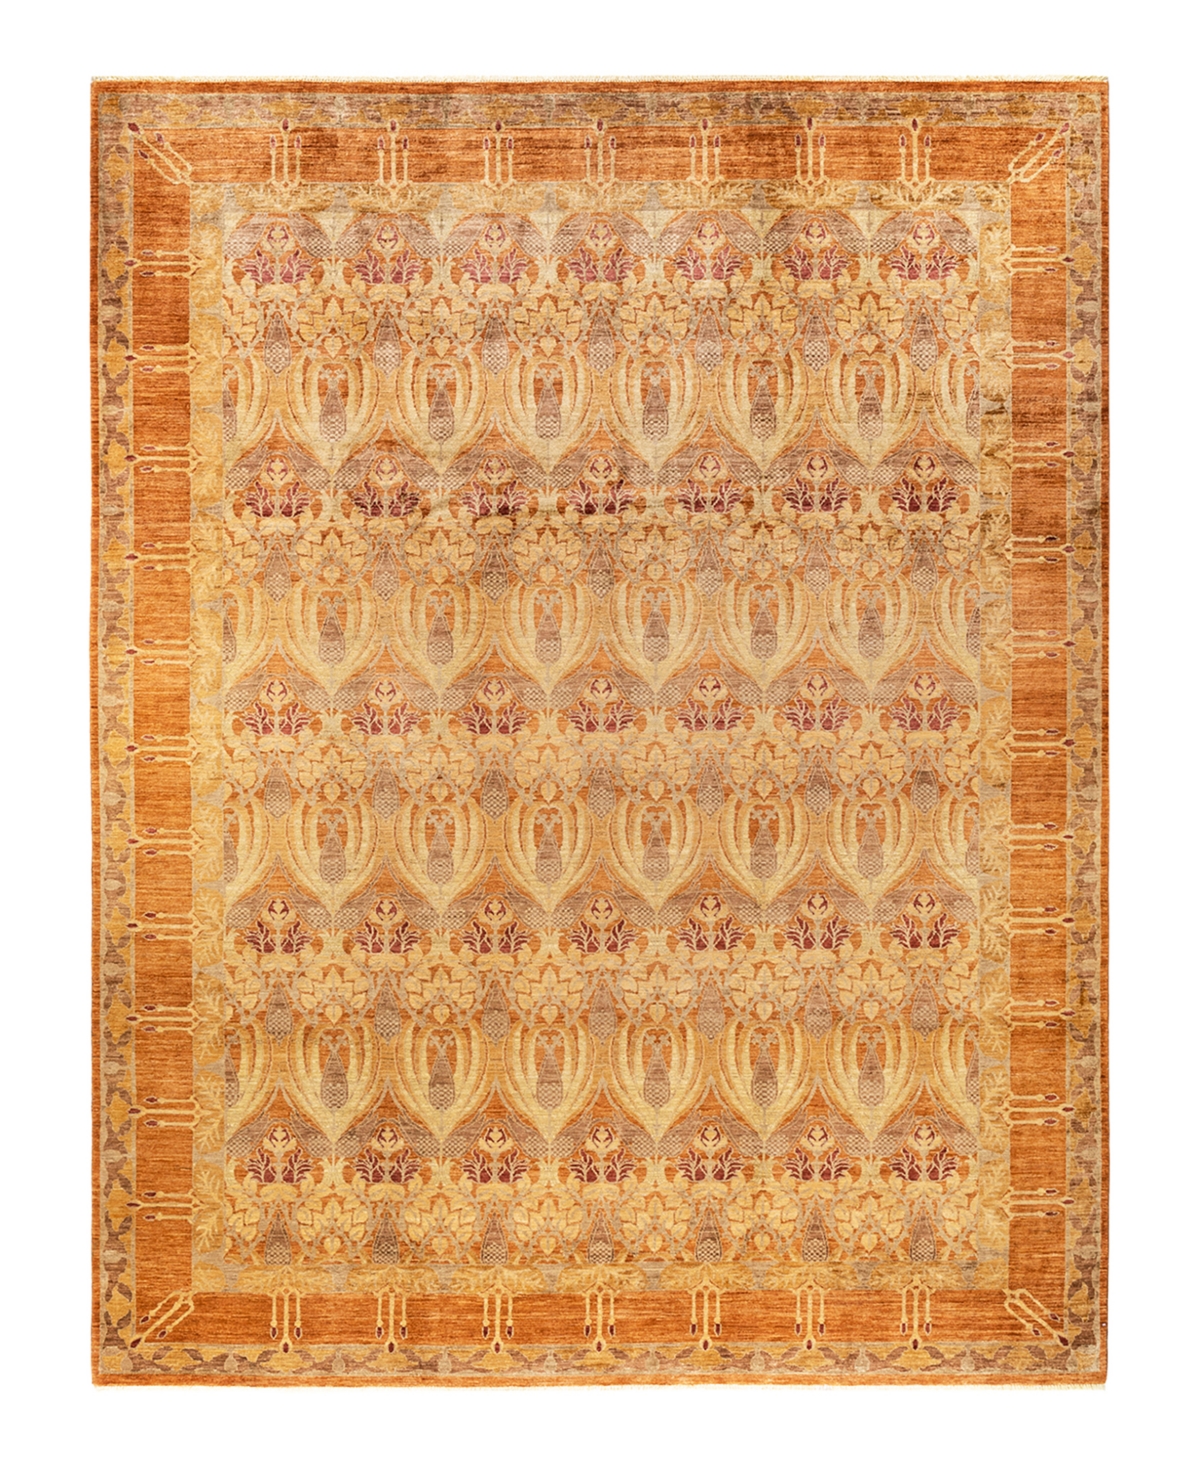 Adorn Hand Woven Rugs Arts Crafts M1566 9'10in x 12'10in Area Rug - Brown